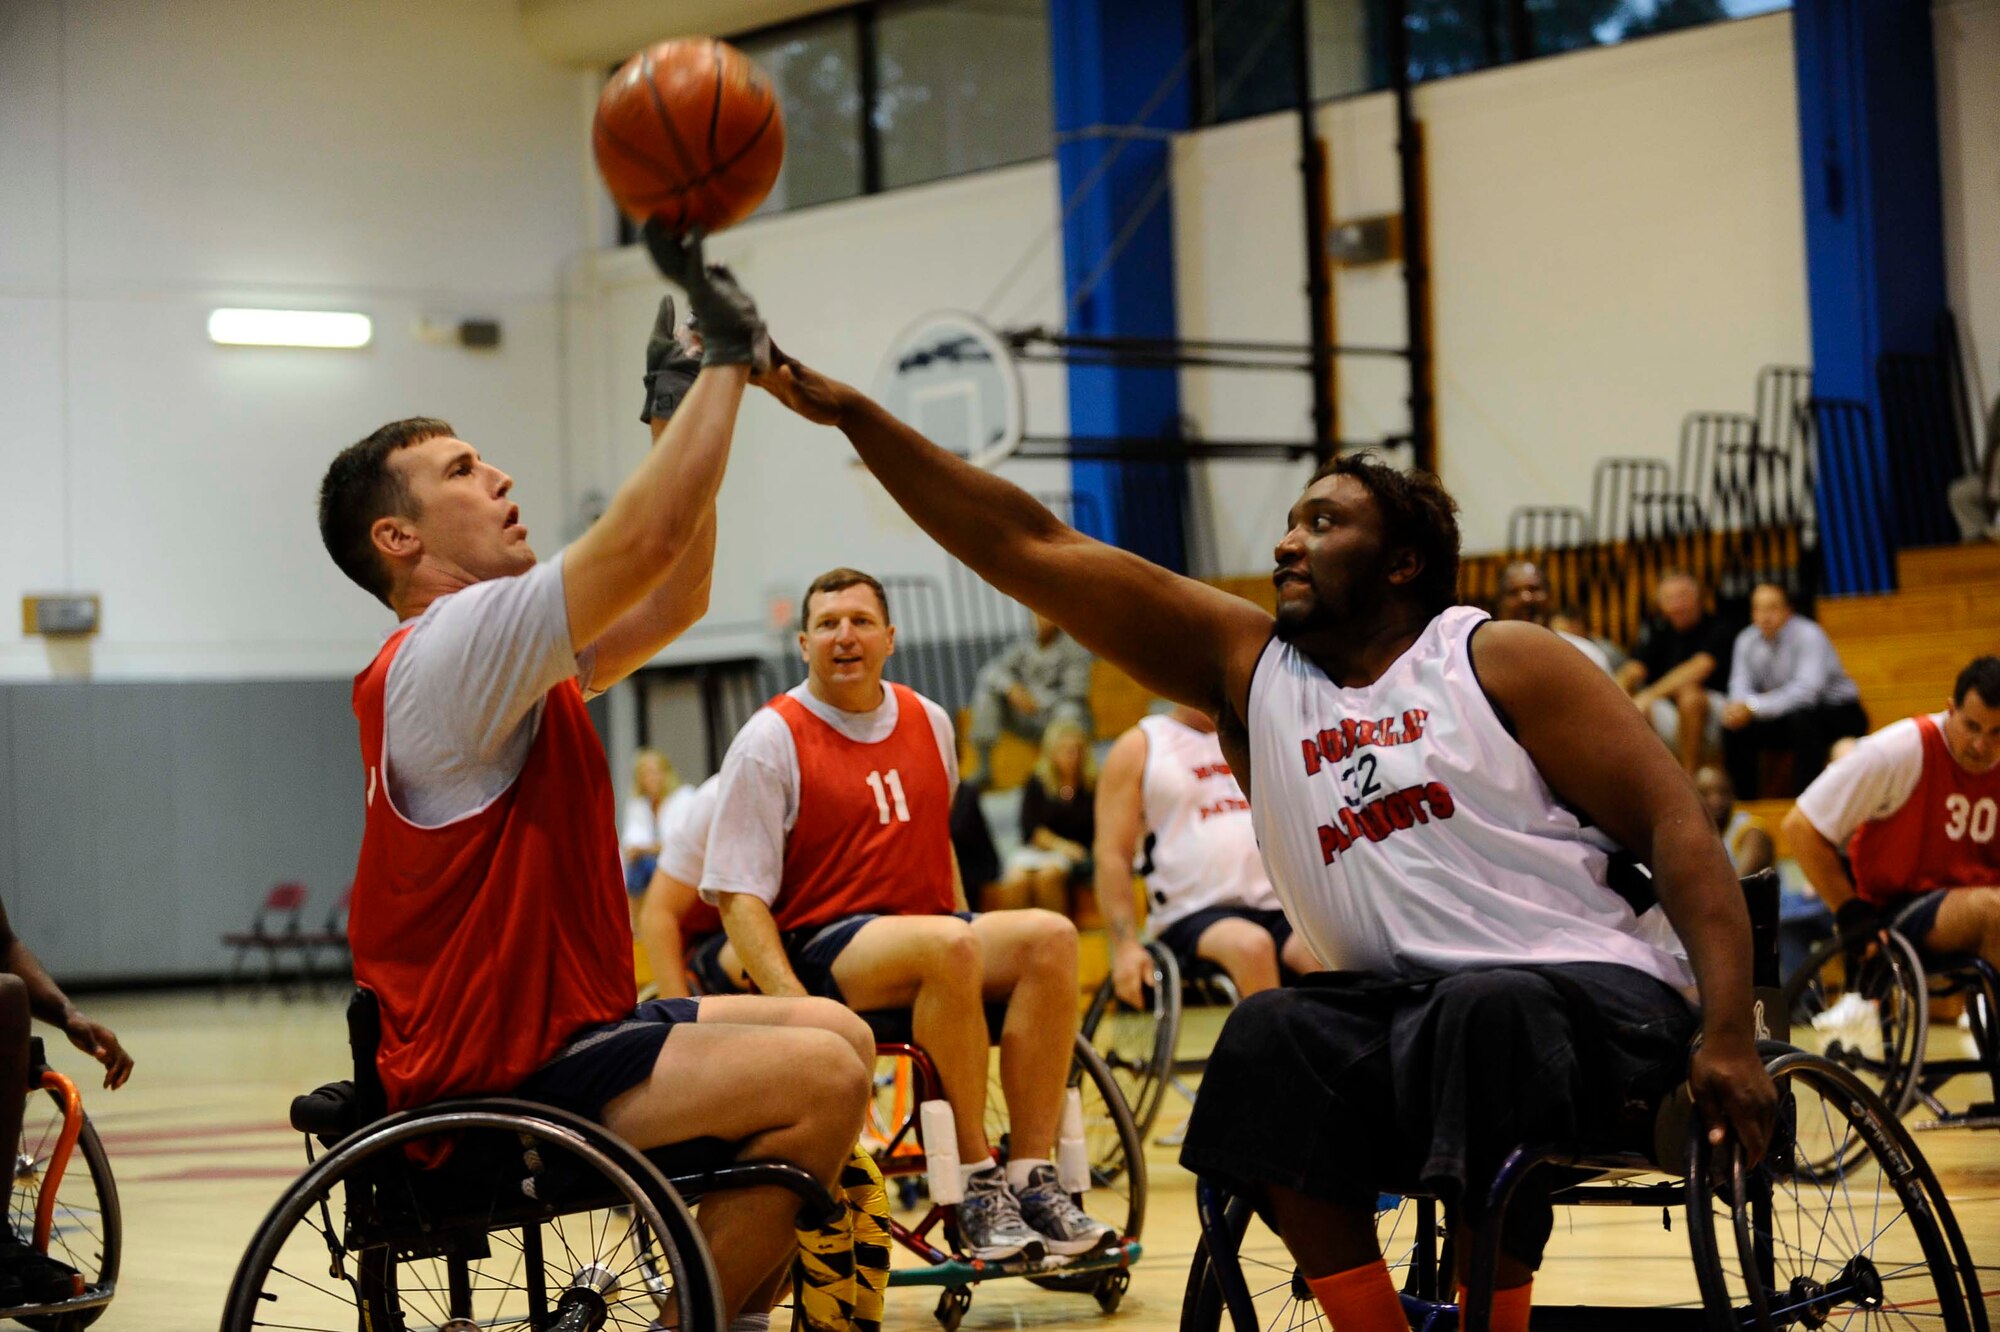 Maj. Shane Vesely, 1st Special Operations Wing executive officer, attempts to shoot a basket over the defense of a member of the Mobile Patriots, a National Wheelchair Basketball Association team, at the fourth annual Wheelchair Basketball Exhibition Game at the Aderholt Fitness Center at Hurlburt Field Oct. 1. (U.S. Air Force photo by Senior Airman Julianne Showalter)